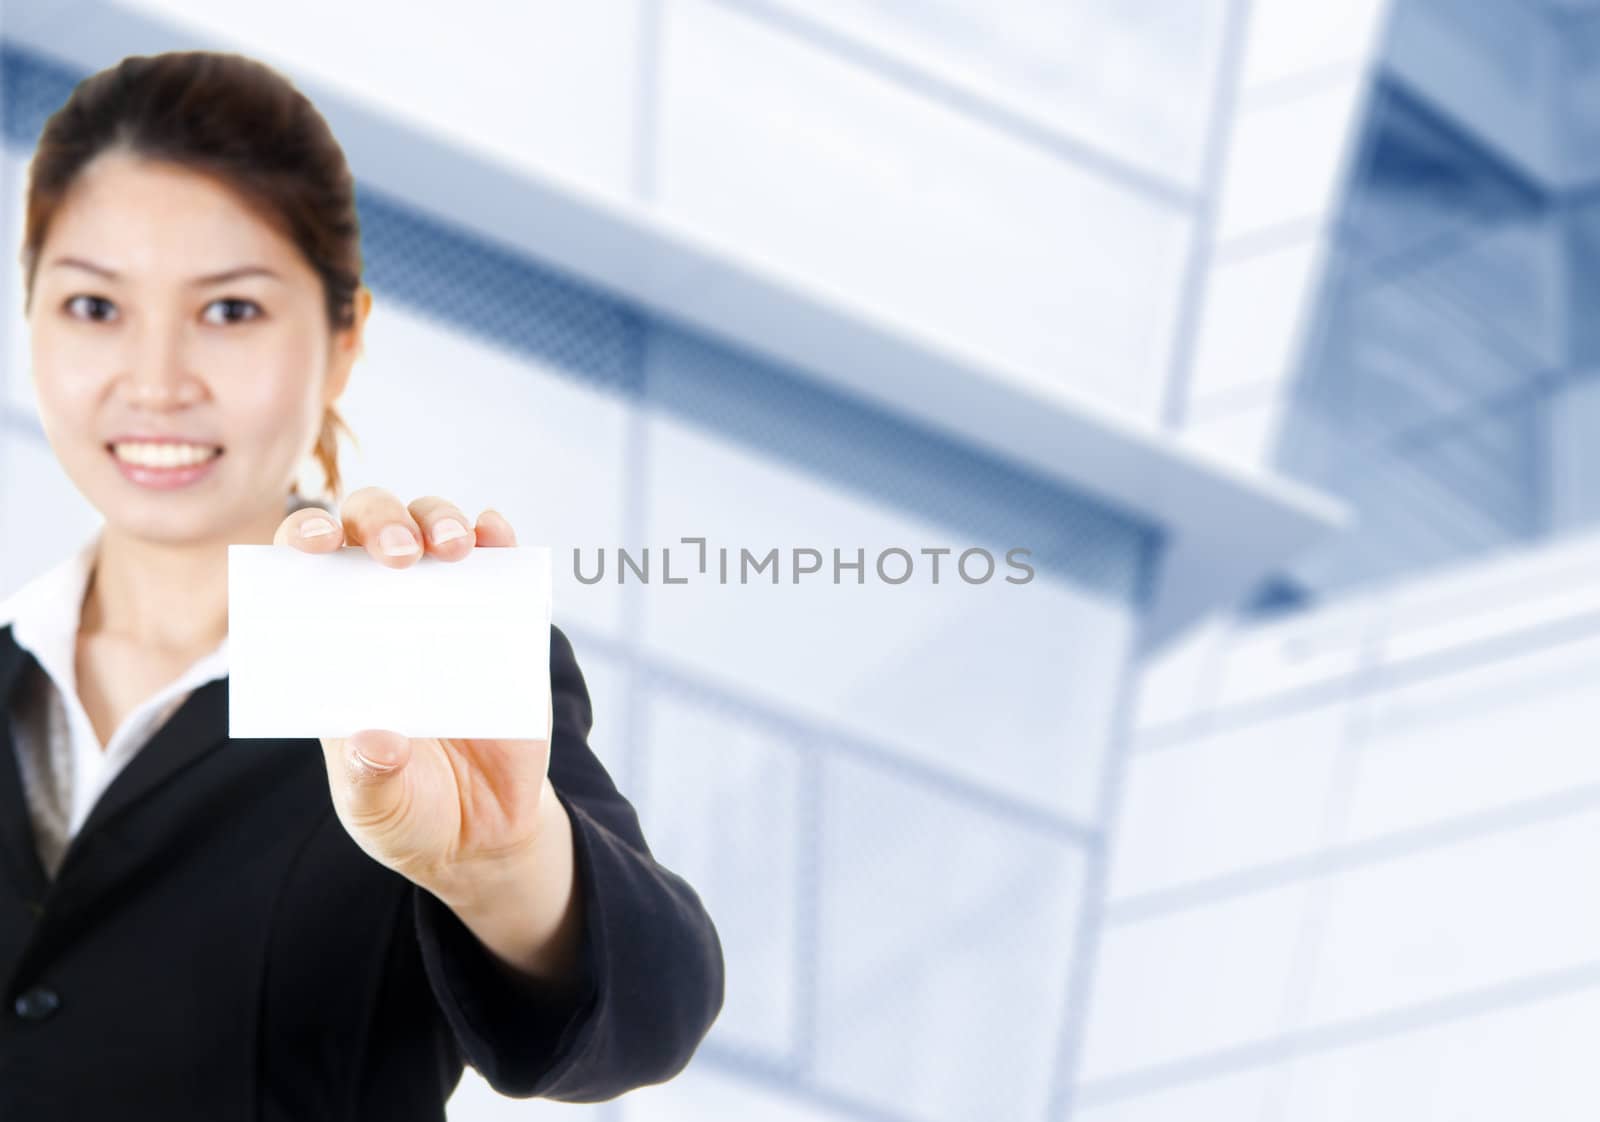 Young Asian with blank business card in a hand, office building as background.